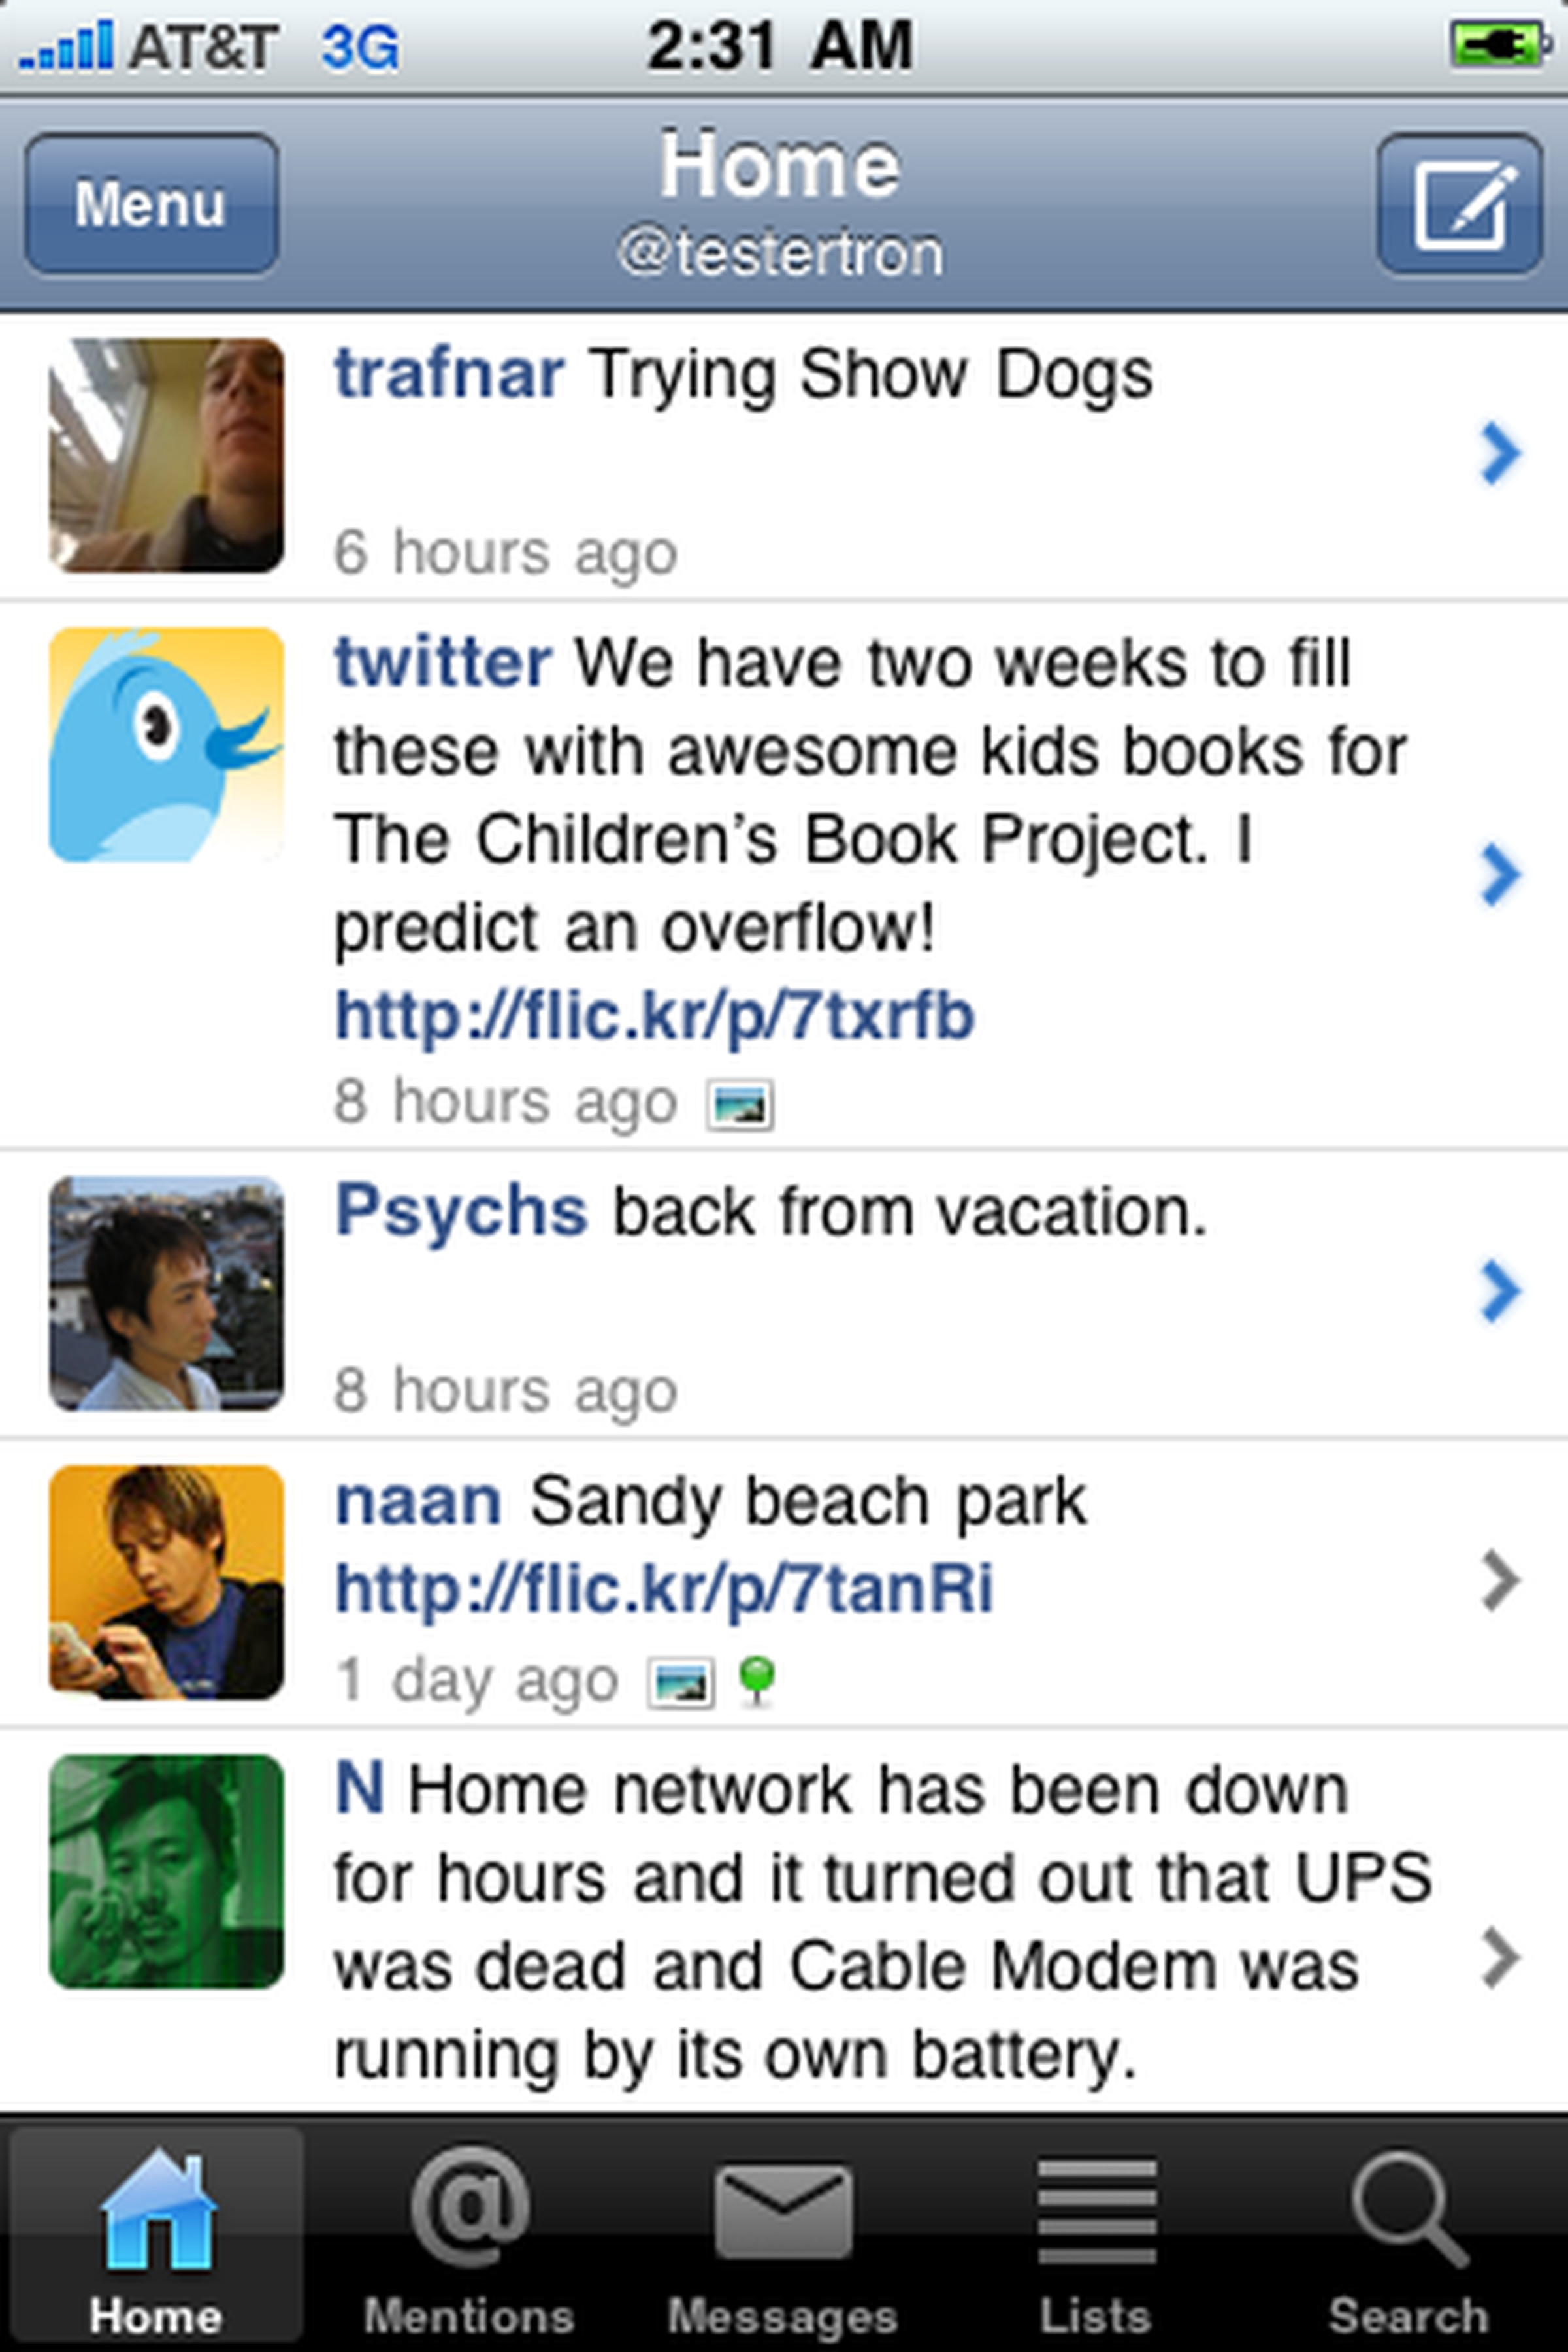 Screenshot of the Echofon Twitter app displaying the timeline view.